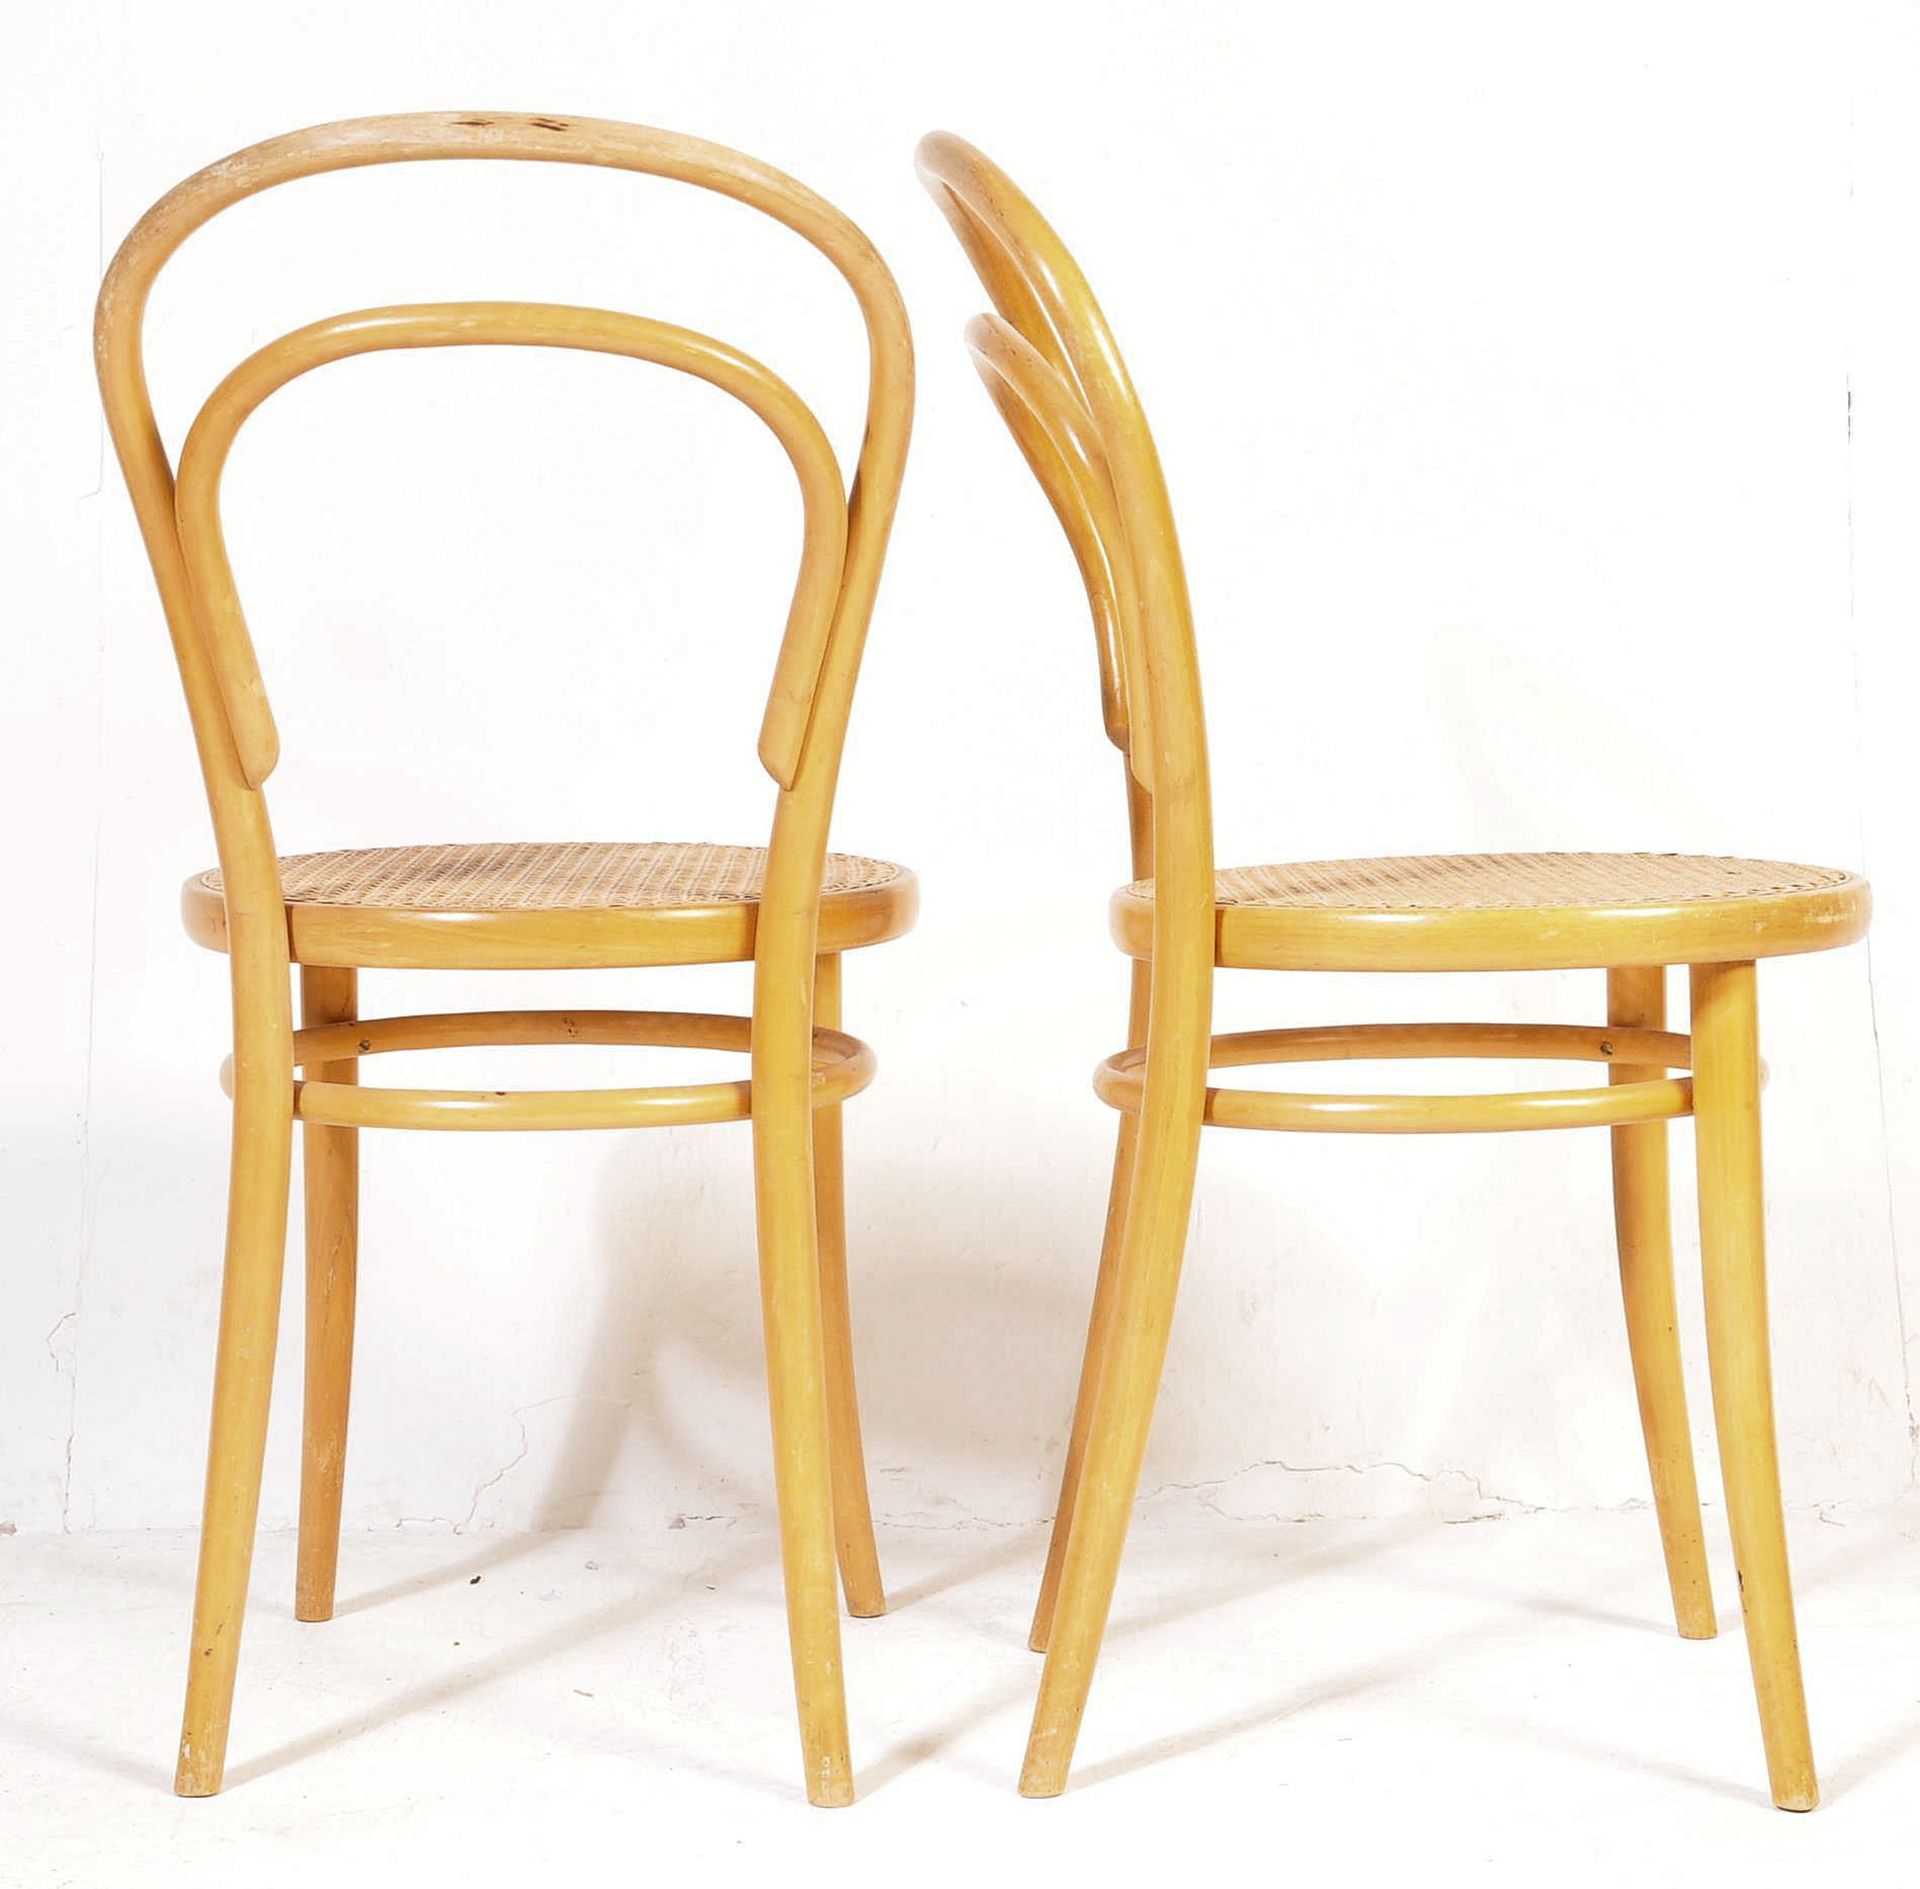 HARLEQUIN SET OF RETRO VINTAGE MID 20TH CENTURY BENTWOOD DINING CHAIRS - Image 7 of 11